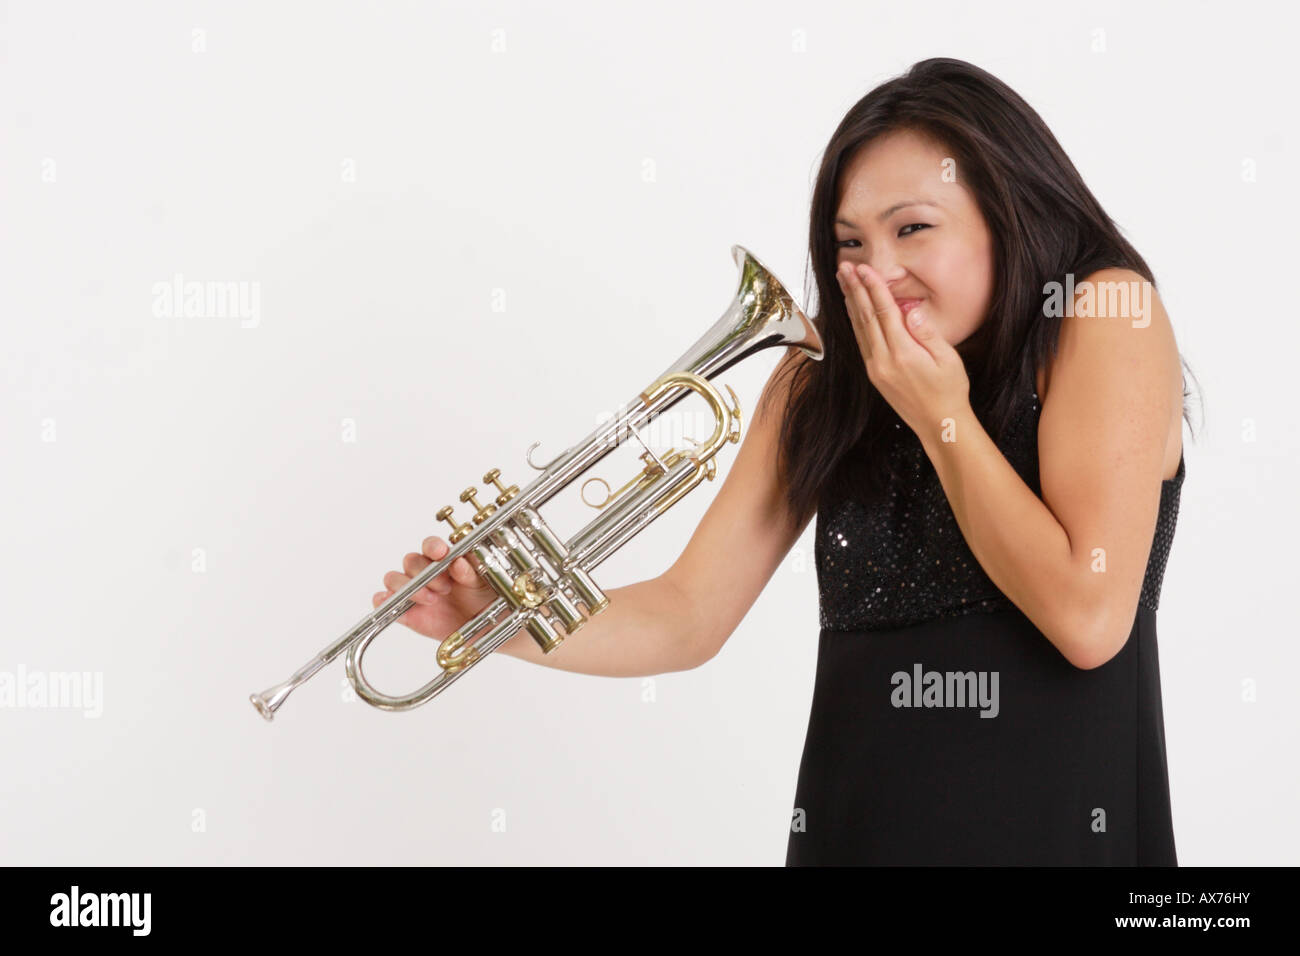 Stock Photograph of a Asian girl laughing while playing with a Stock Photo, Royalty 